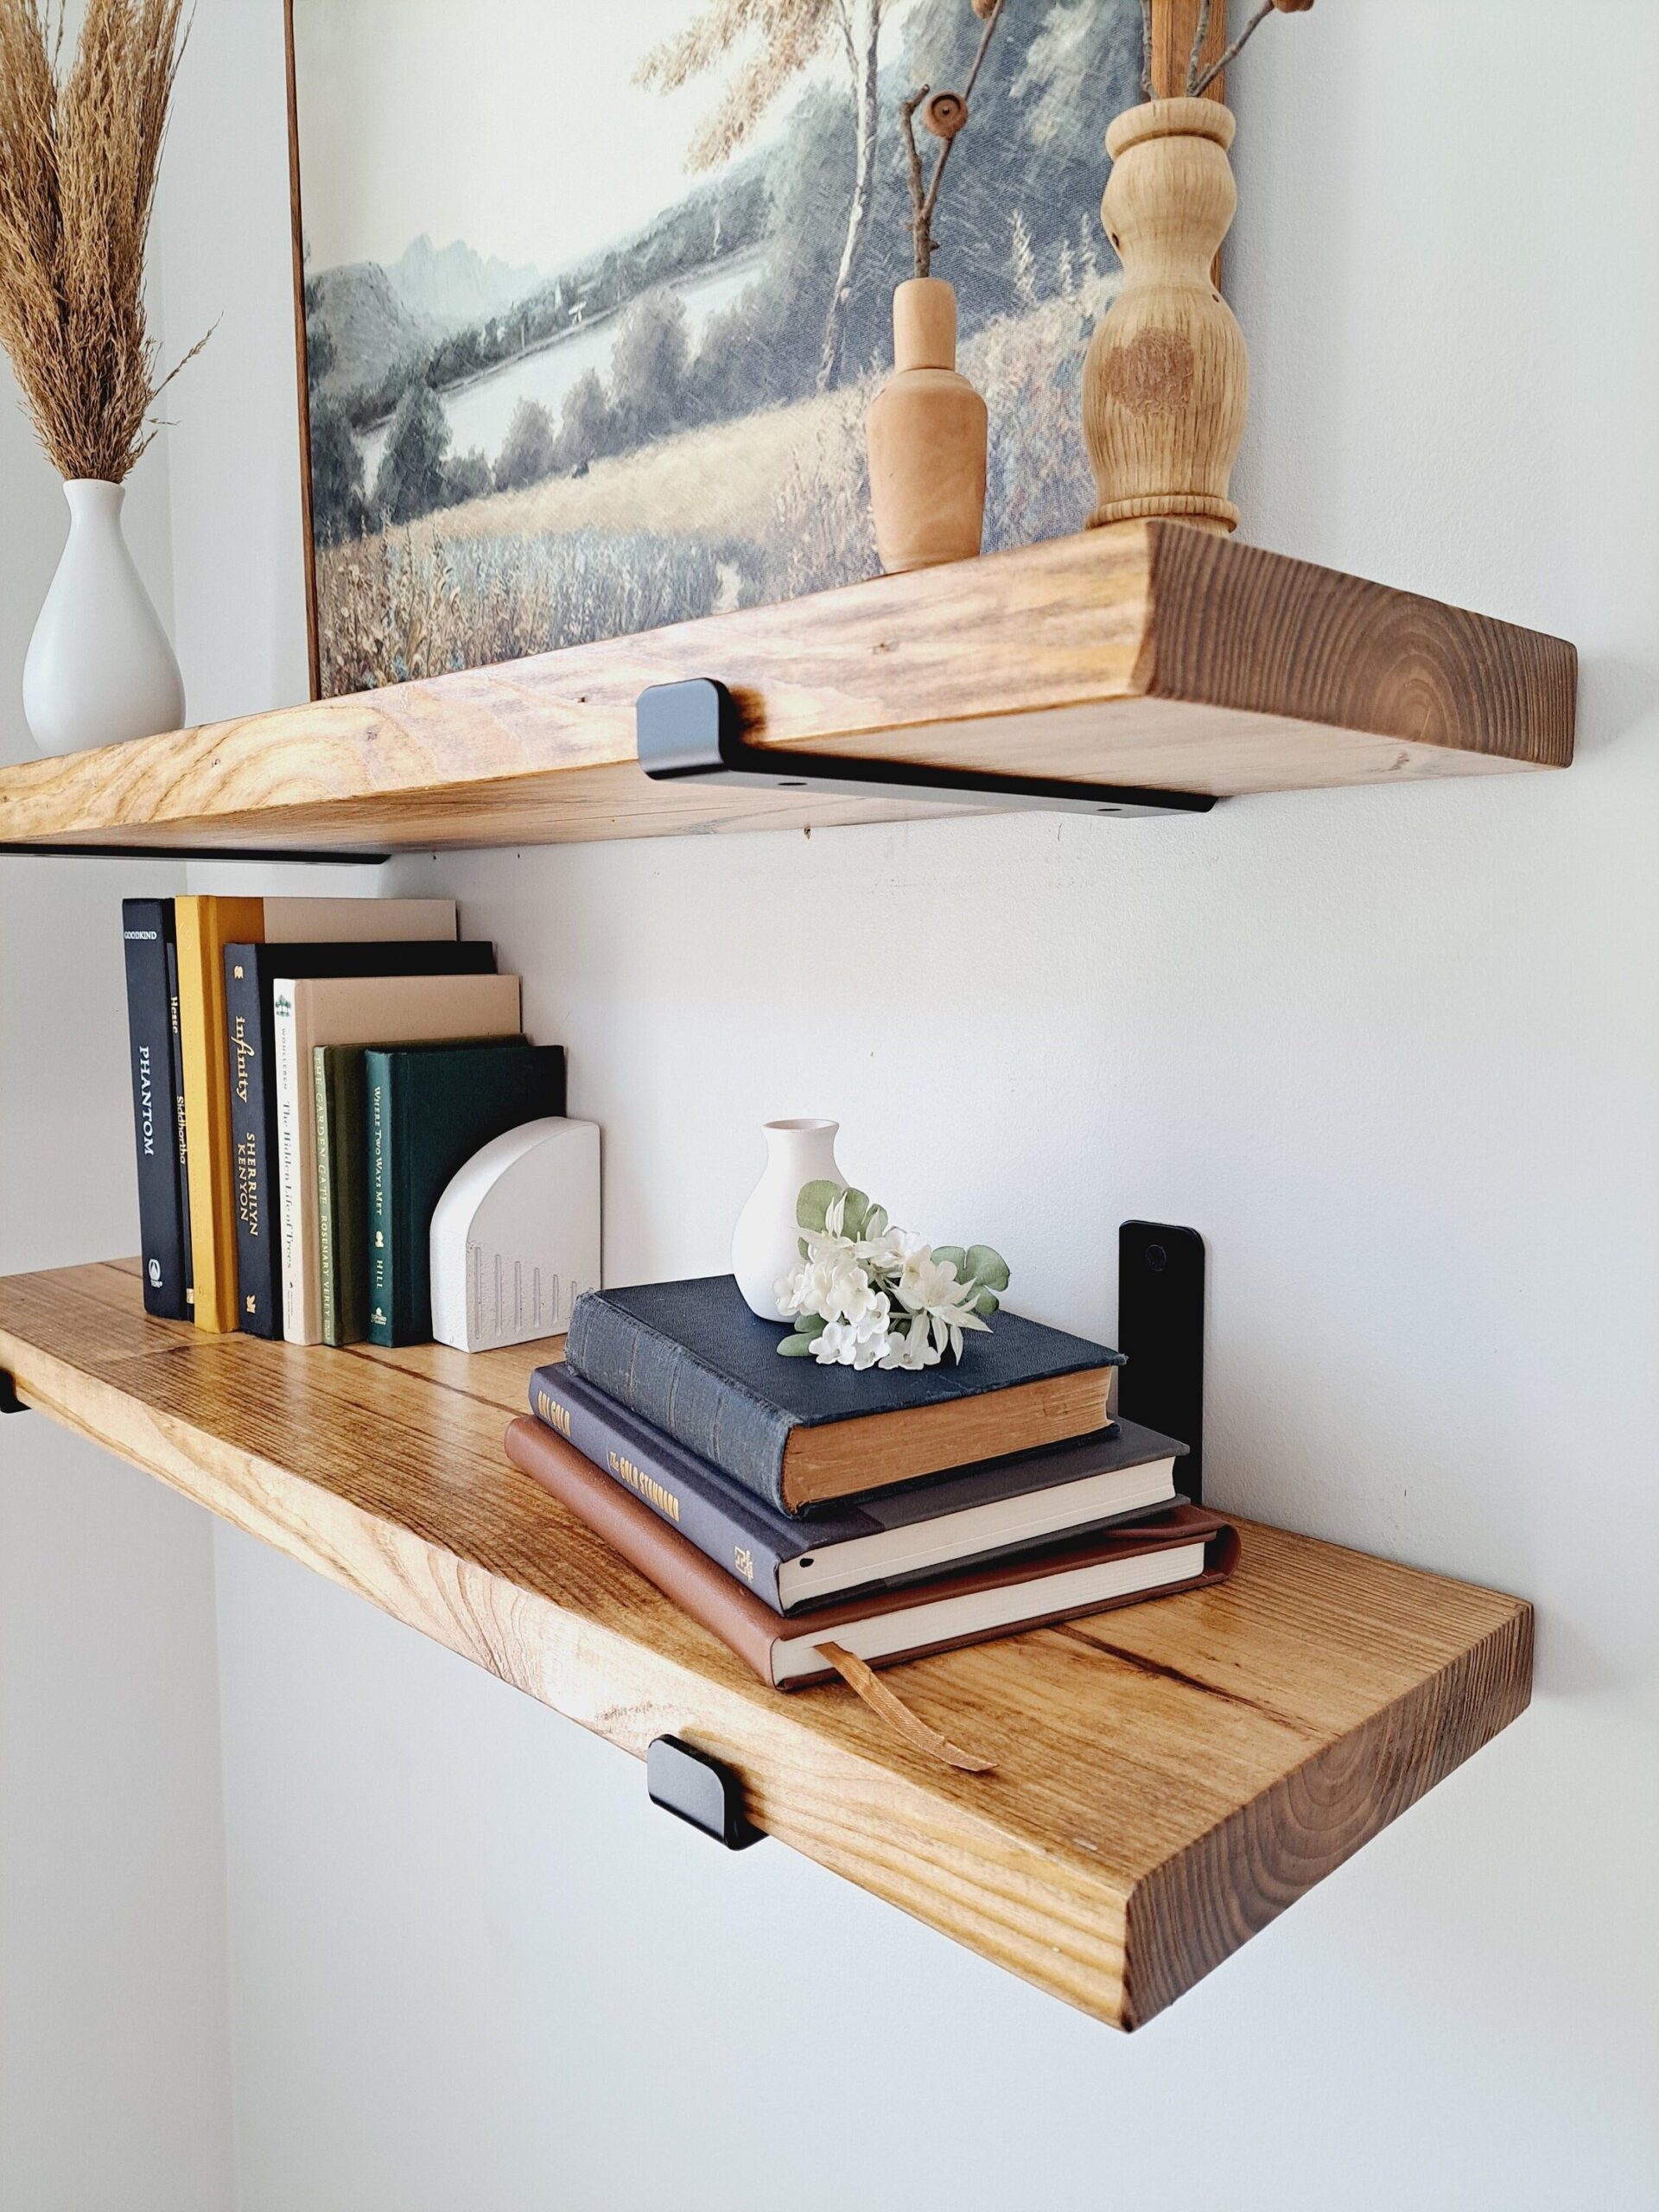 Innovative Uses for Floating Wall Shelves
in Every Room